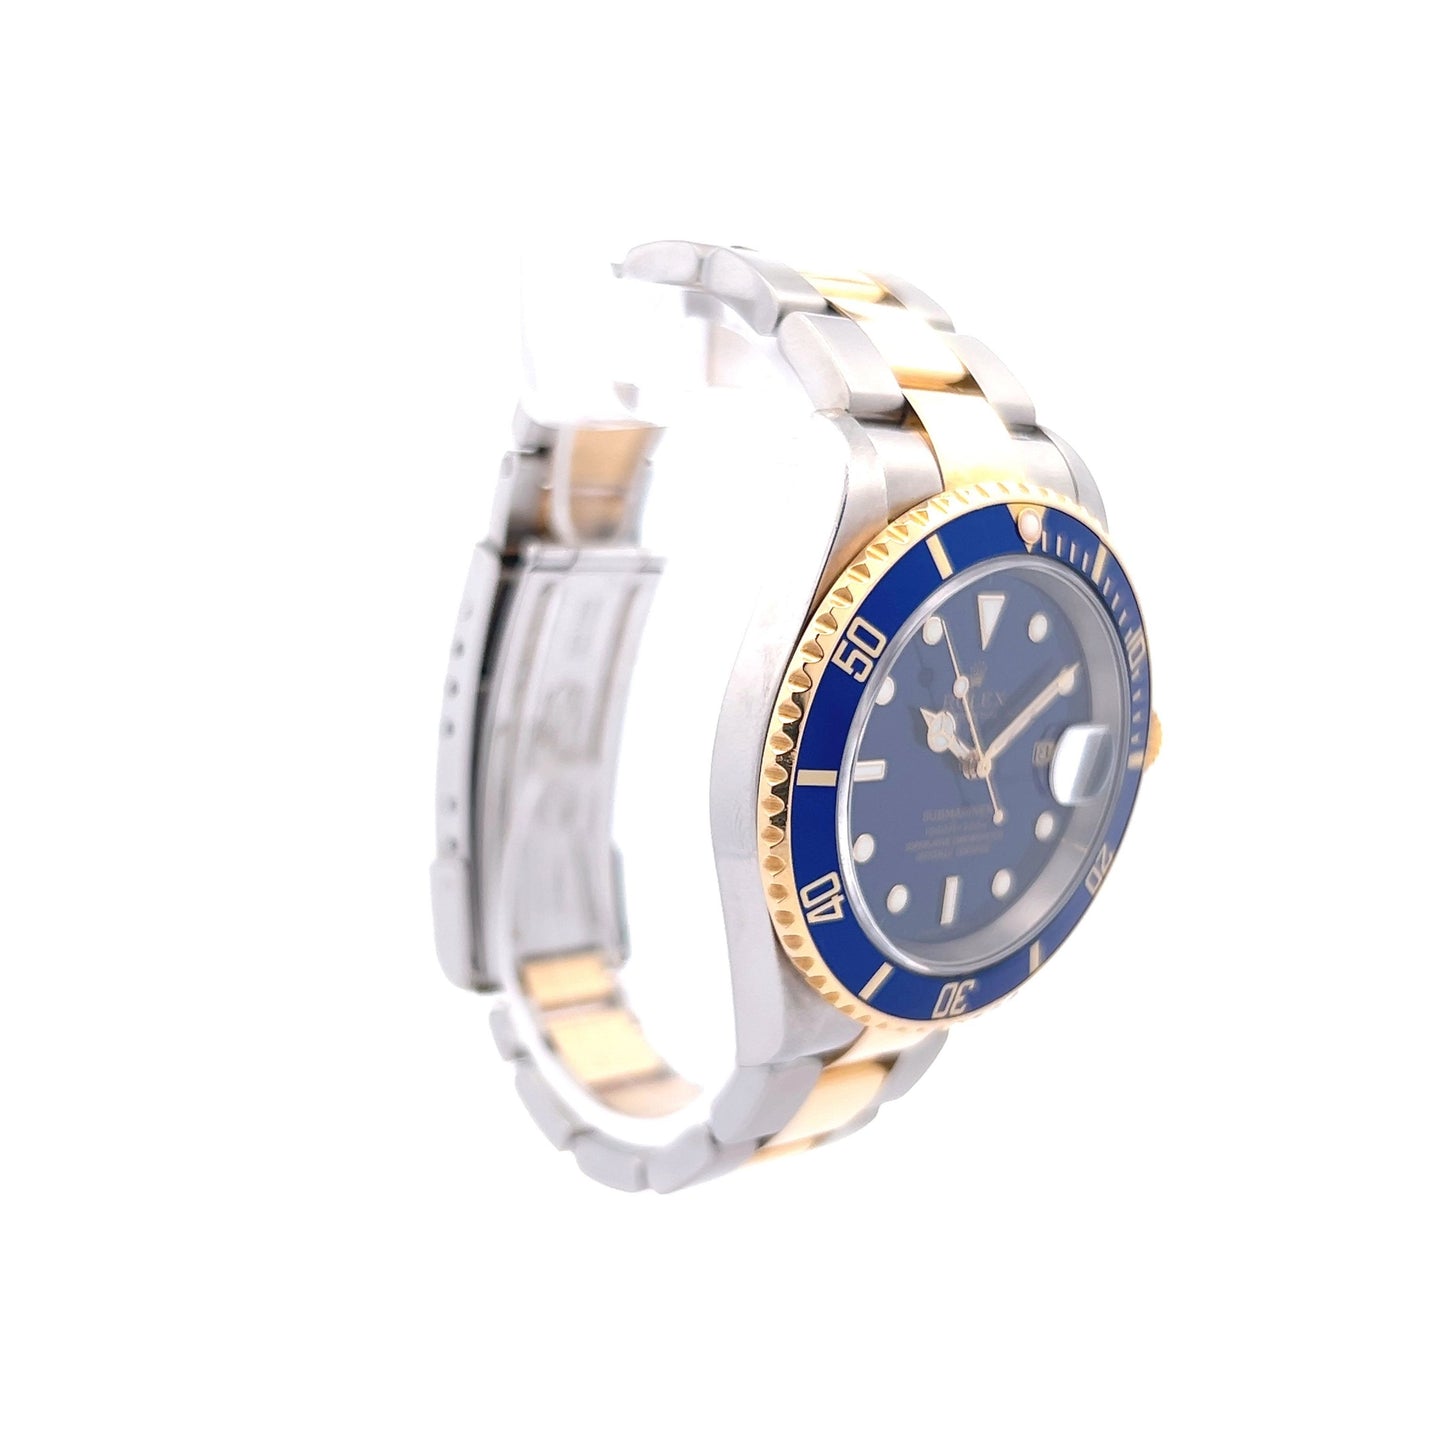 Rolex Submariner Two-Tone Blue Dial Oyster 16613